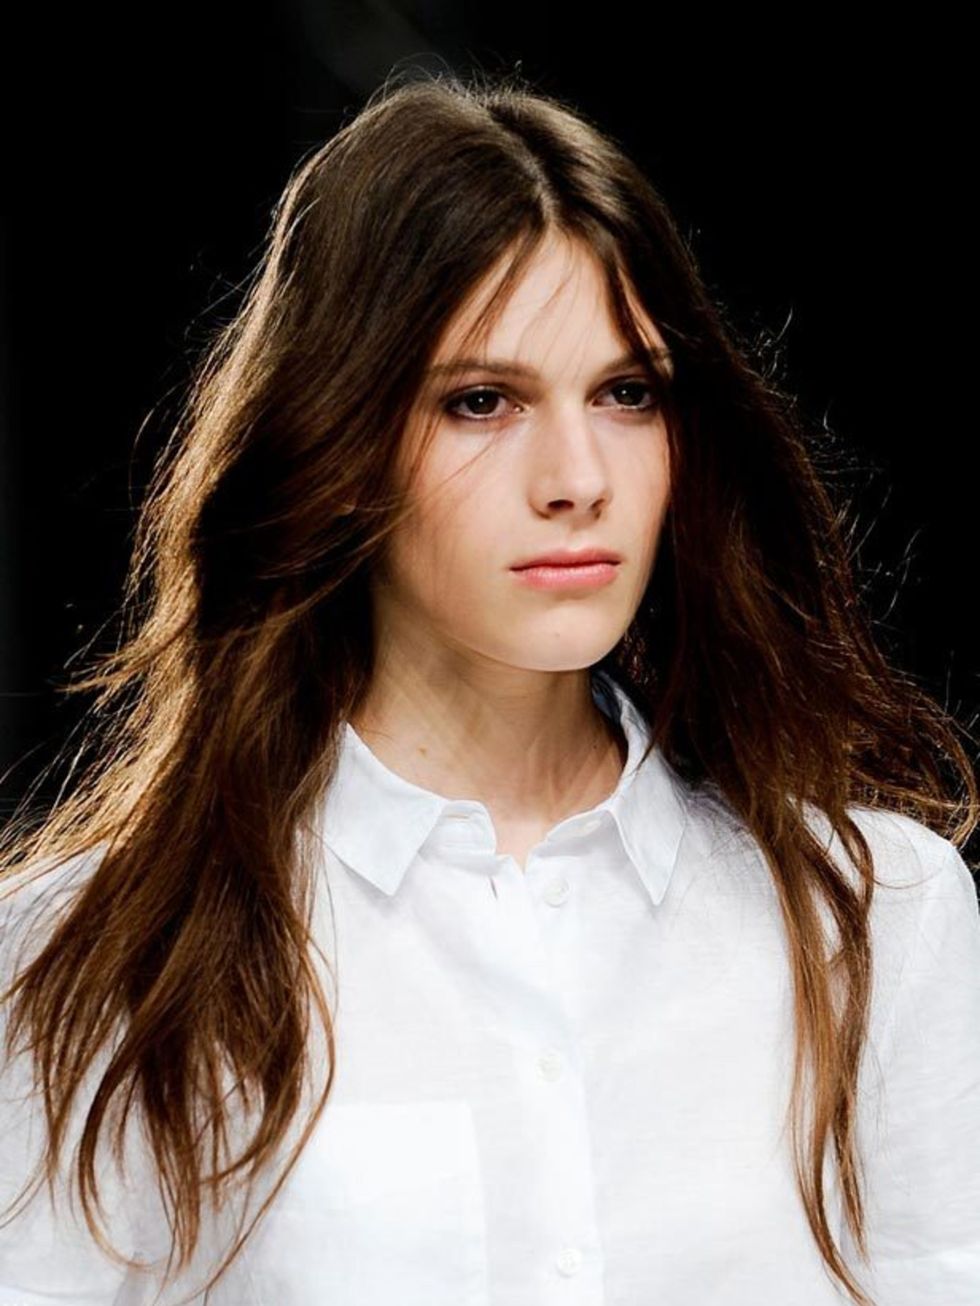 <p>Skin is hyper-real, super dewy perfection for spring/summer. Where make-up artists saved time on omitting mascara, lipstick and blusher from looks, they devoted it to buffing, glossing and generally beautifying models' skin. Andrew Gallimore at Holly F